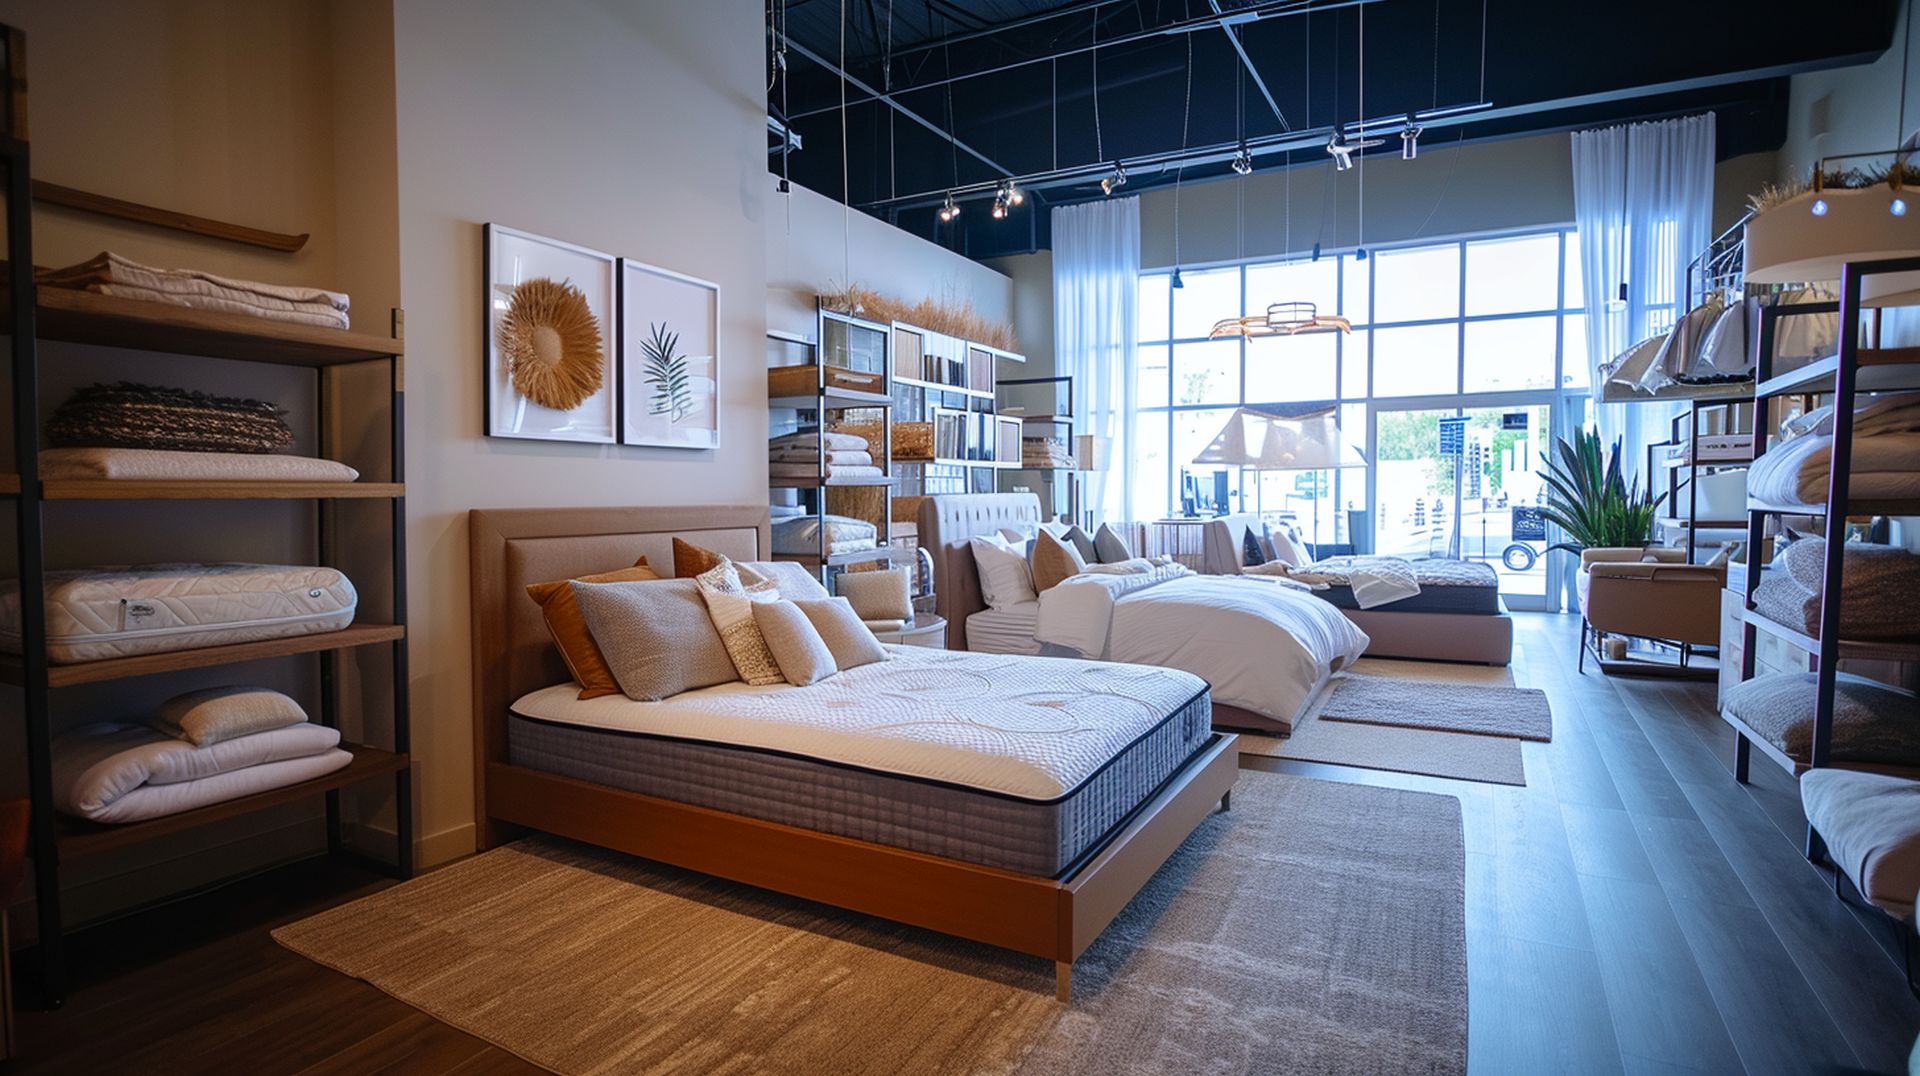 Local Laguna Niguel mattress stores have the best prices, sales, and deals if you're looking for a new mattress in Laguna Niguel